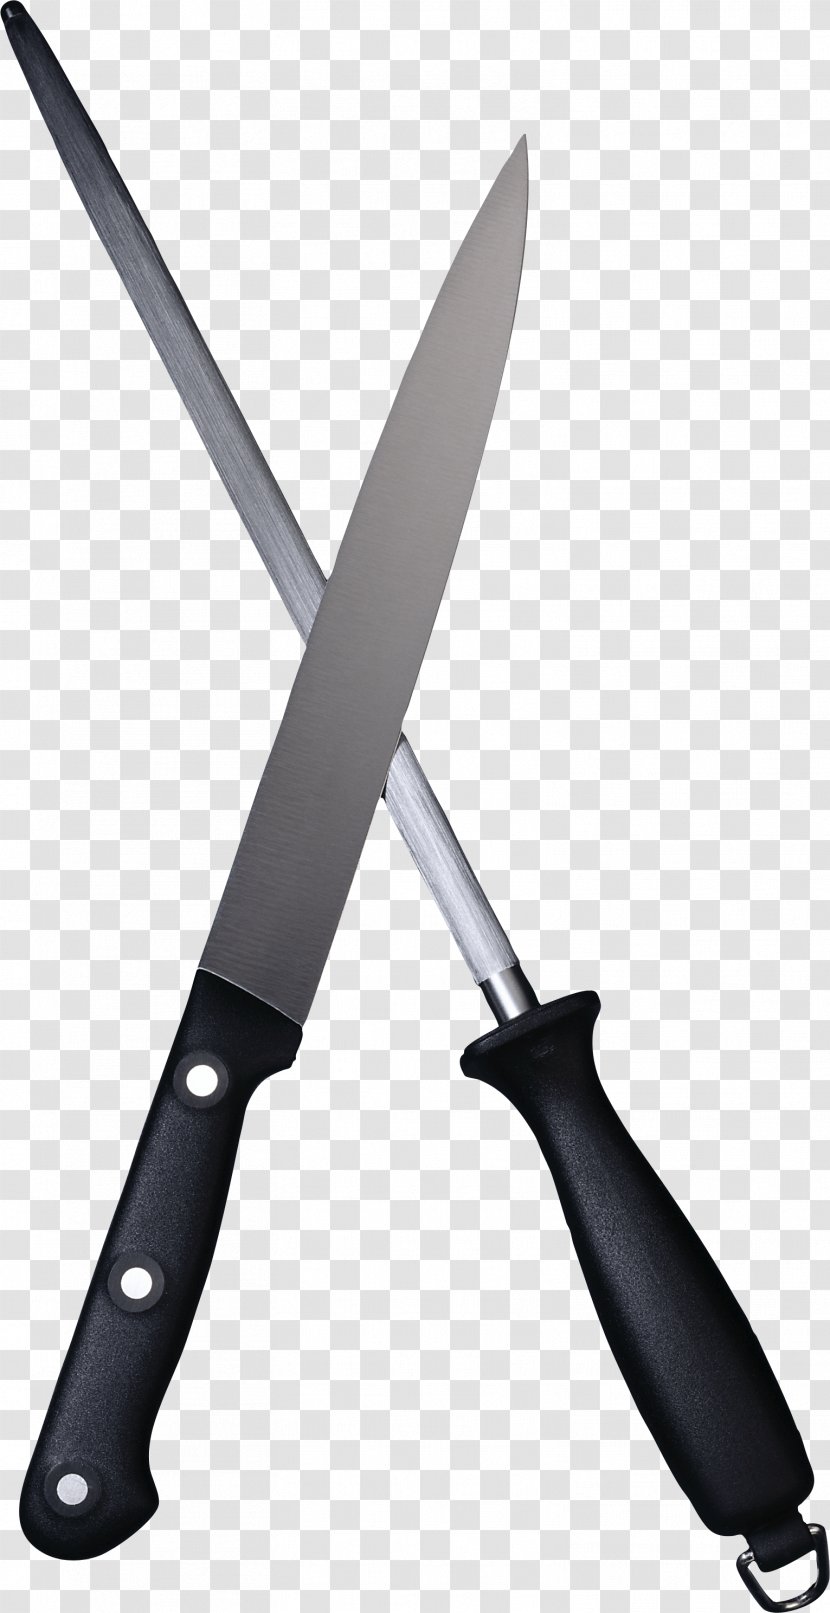 Bowie Knife Hunting & Survival Knives Utility Throwing - Blade Transparent PNG